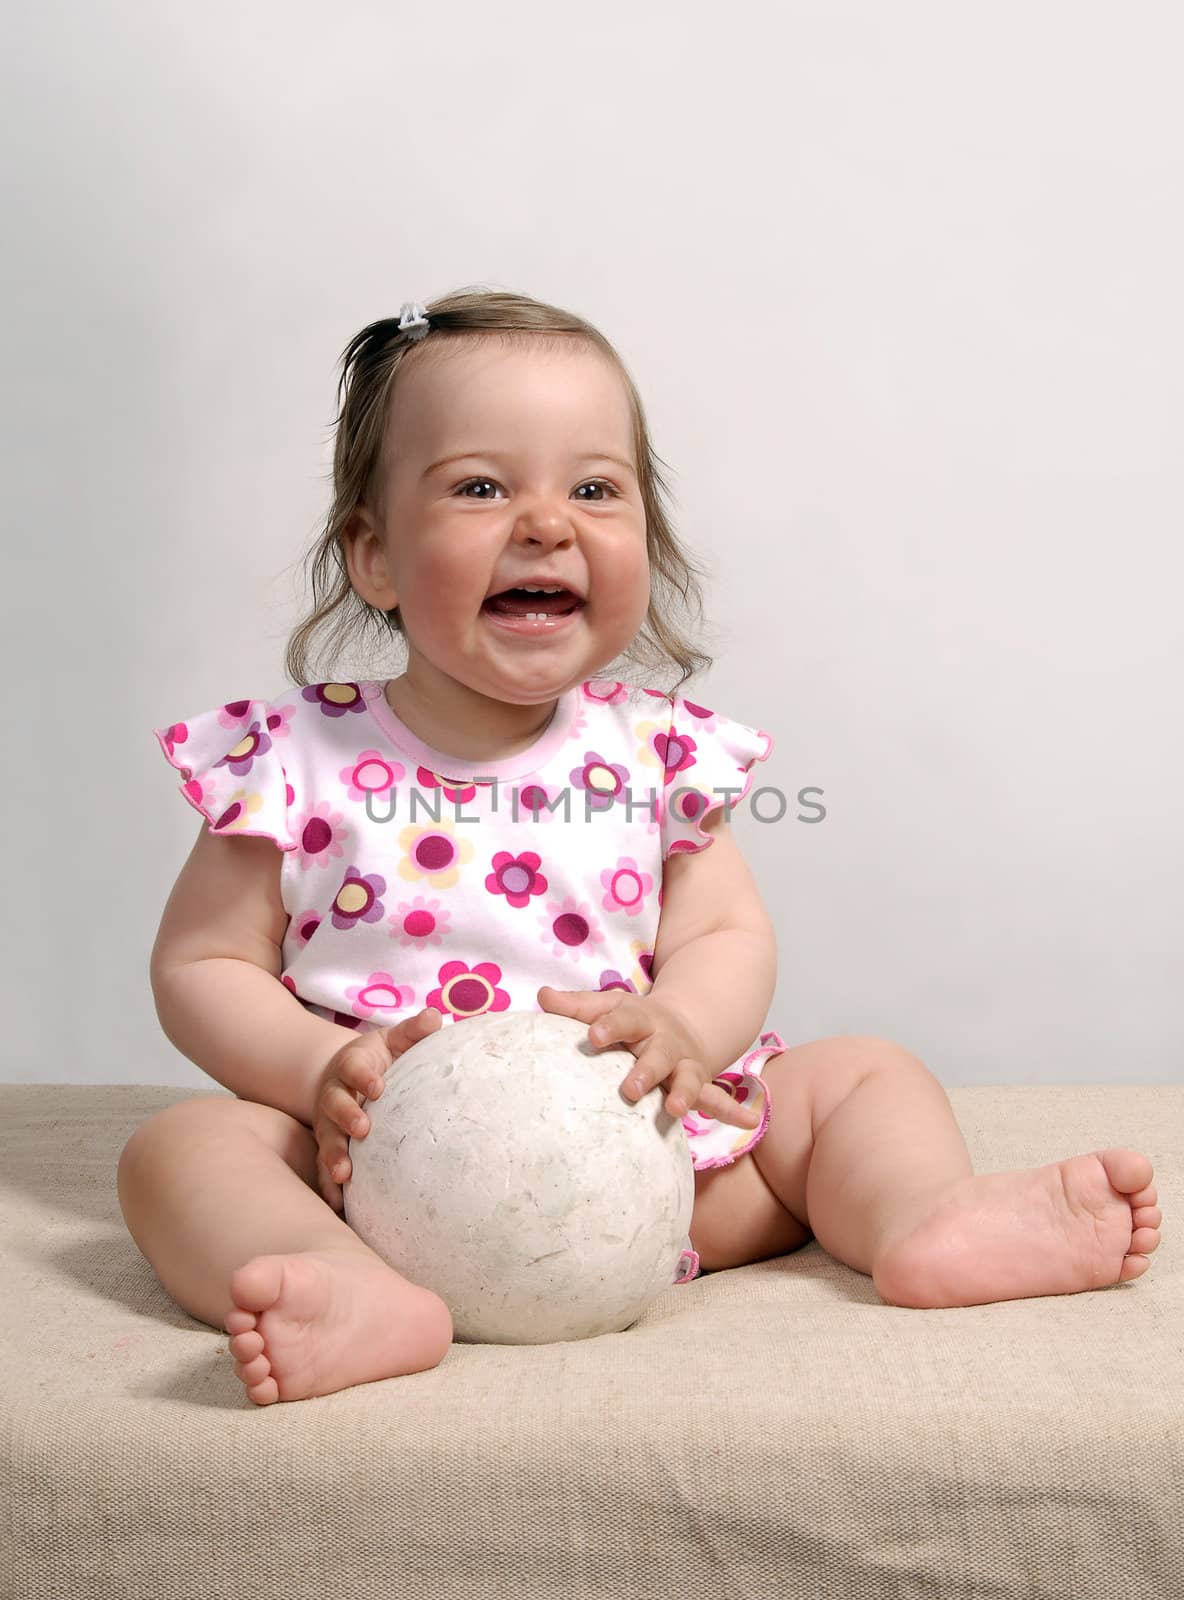 Laughing cute baby with white ball isolated on white background
